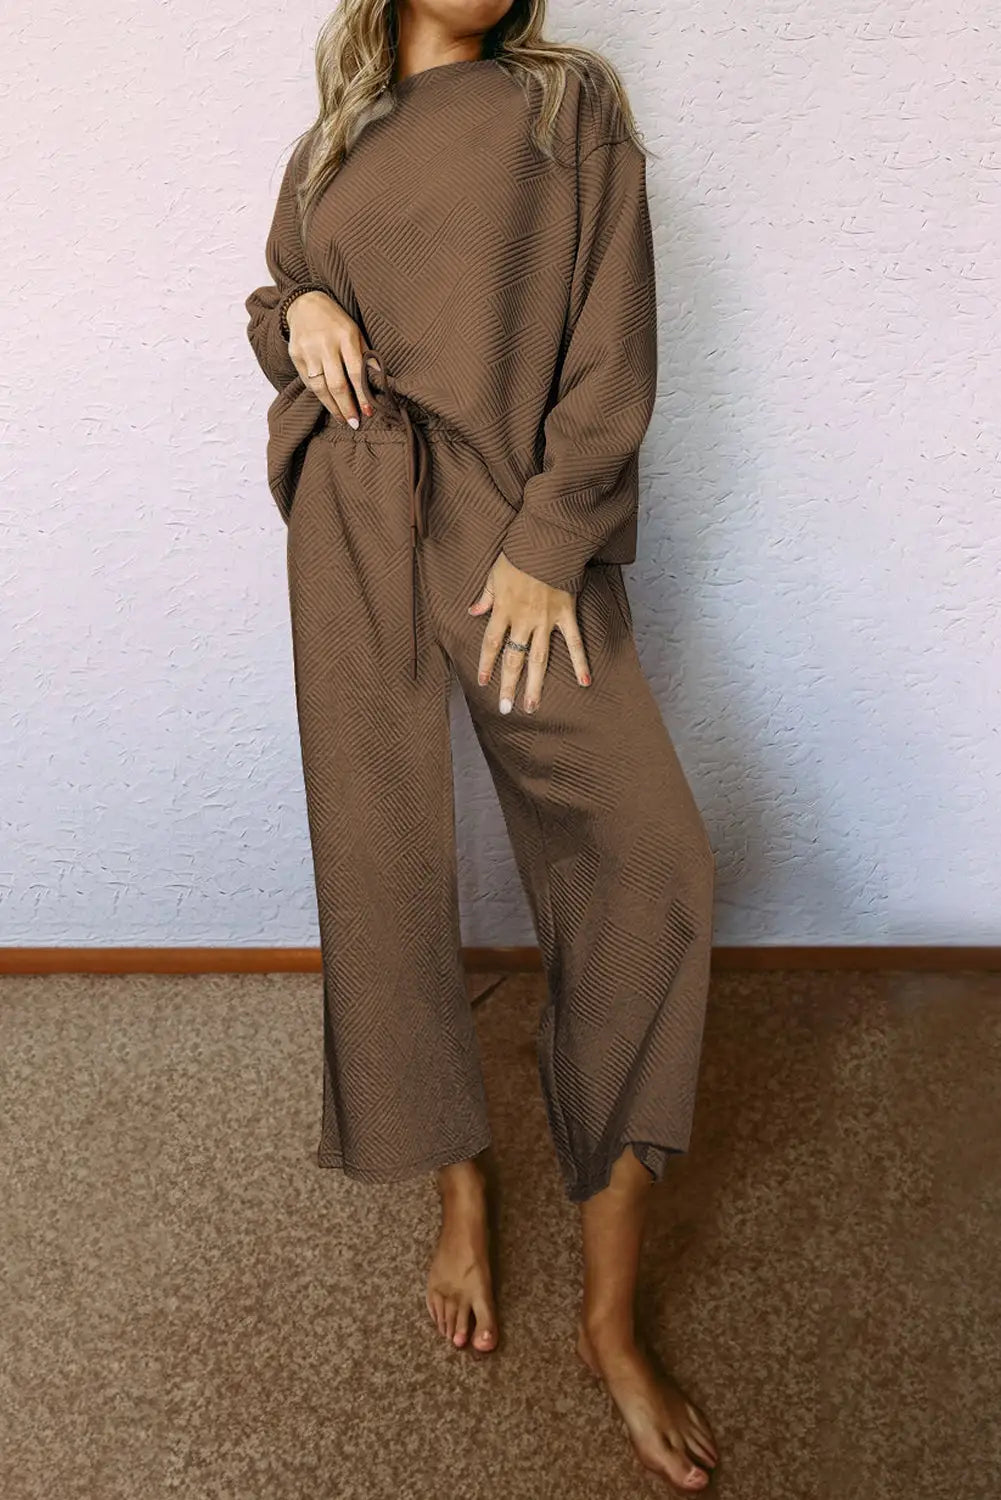 Dark brown ultra loose textured 2pcs slouchy outfit - s / 95% polyester + 5% elastane - loungewear